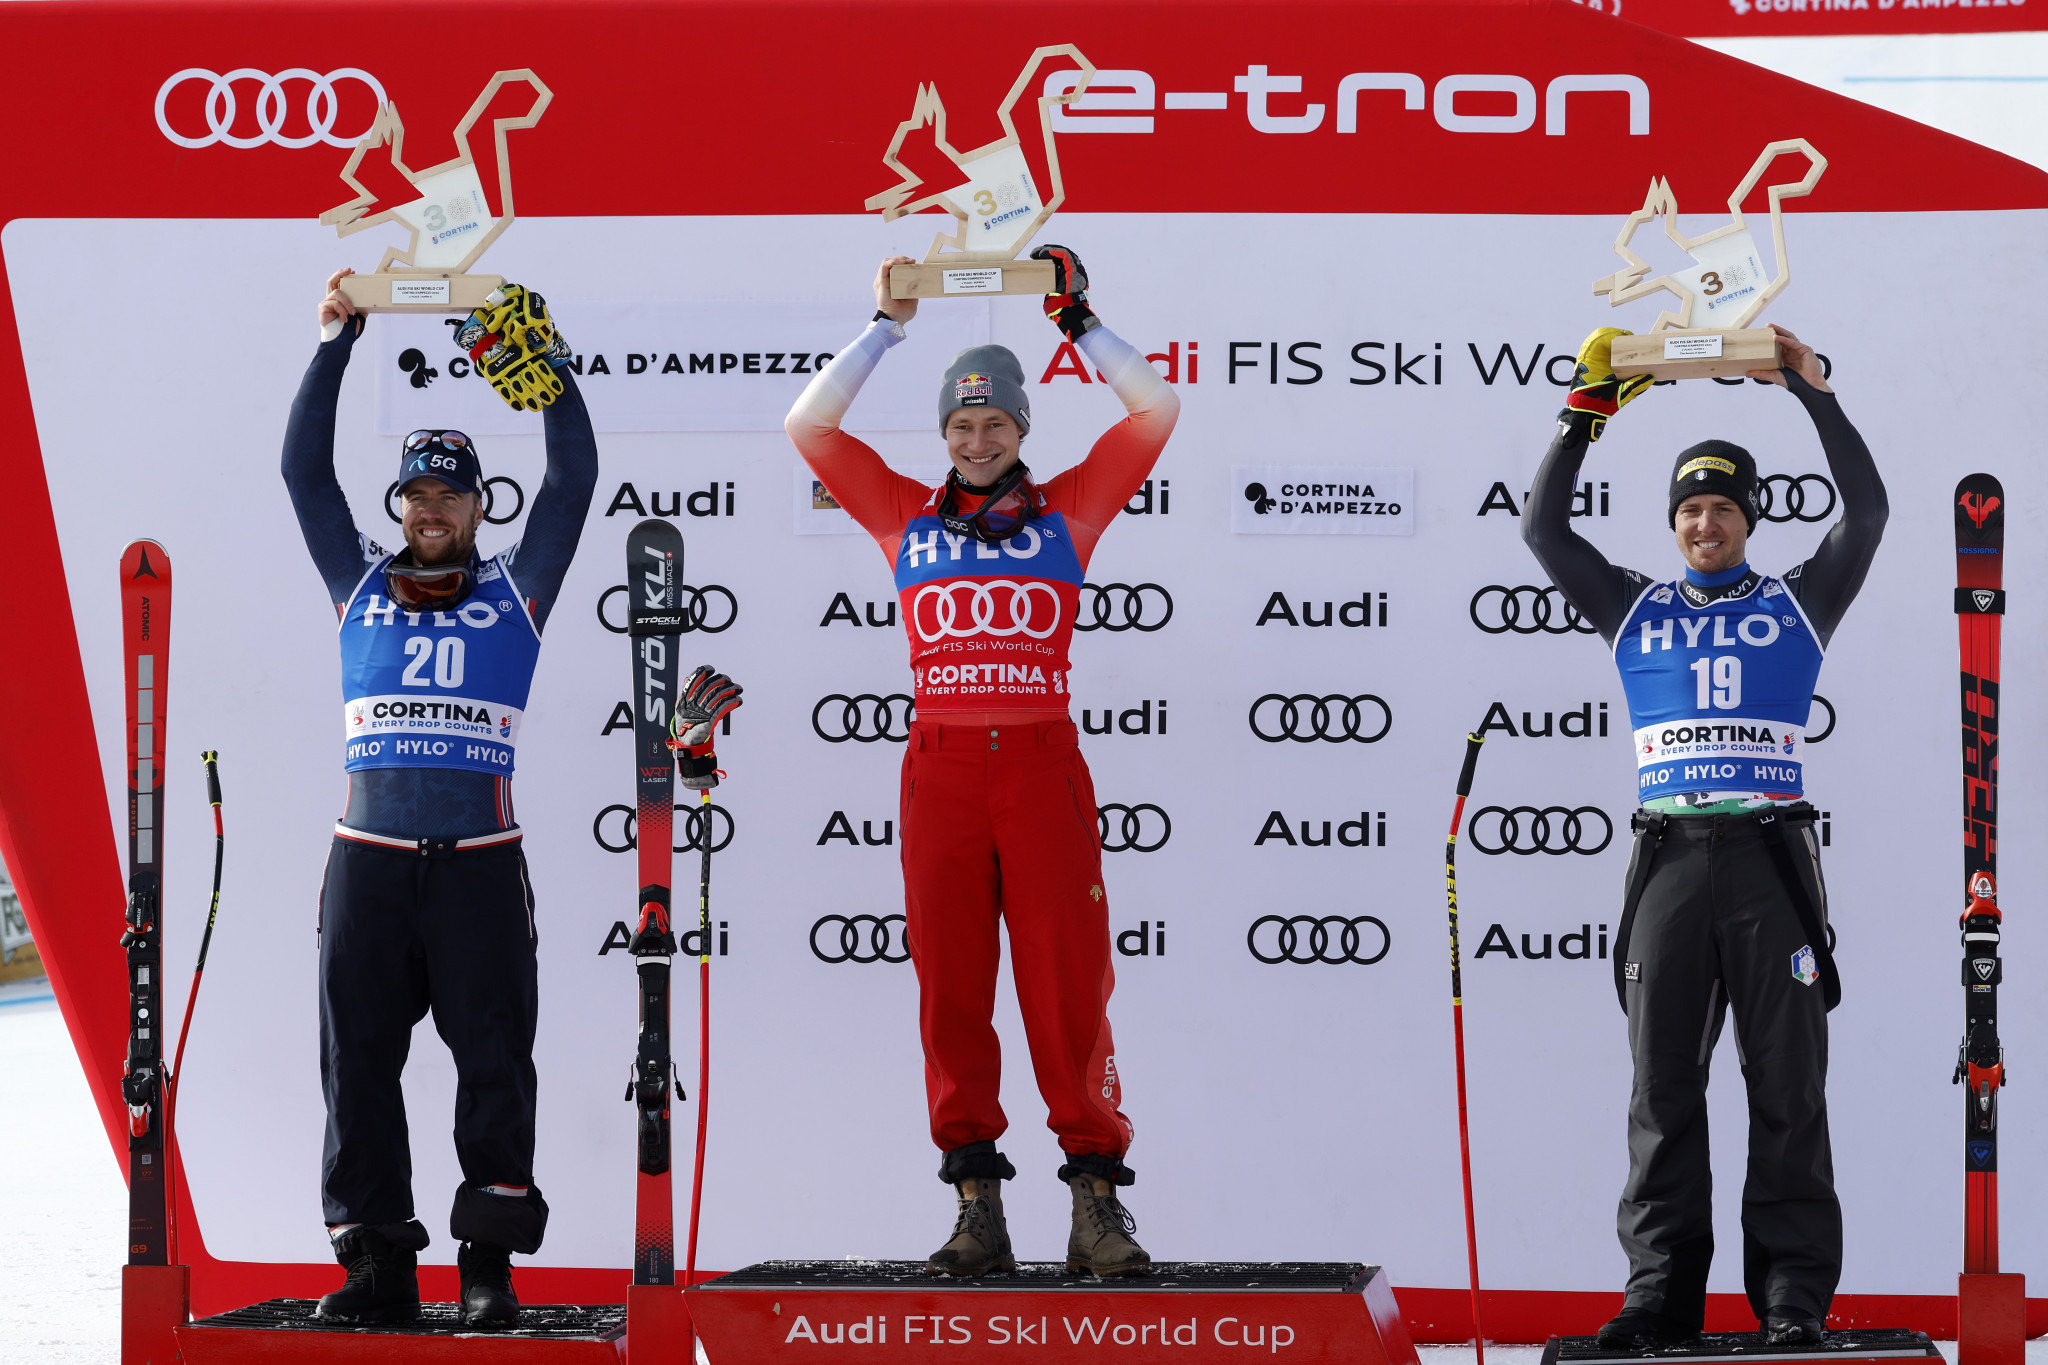 The podium for the men's super-G at the FIS Alpine Skiing World Cup in Cortina D'Ampezzo ©Getty Images